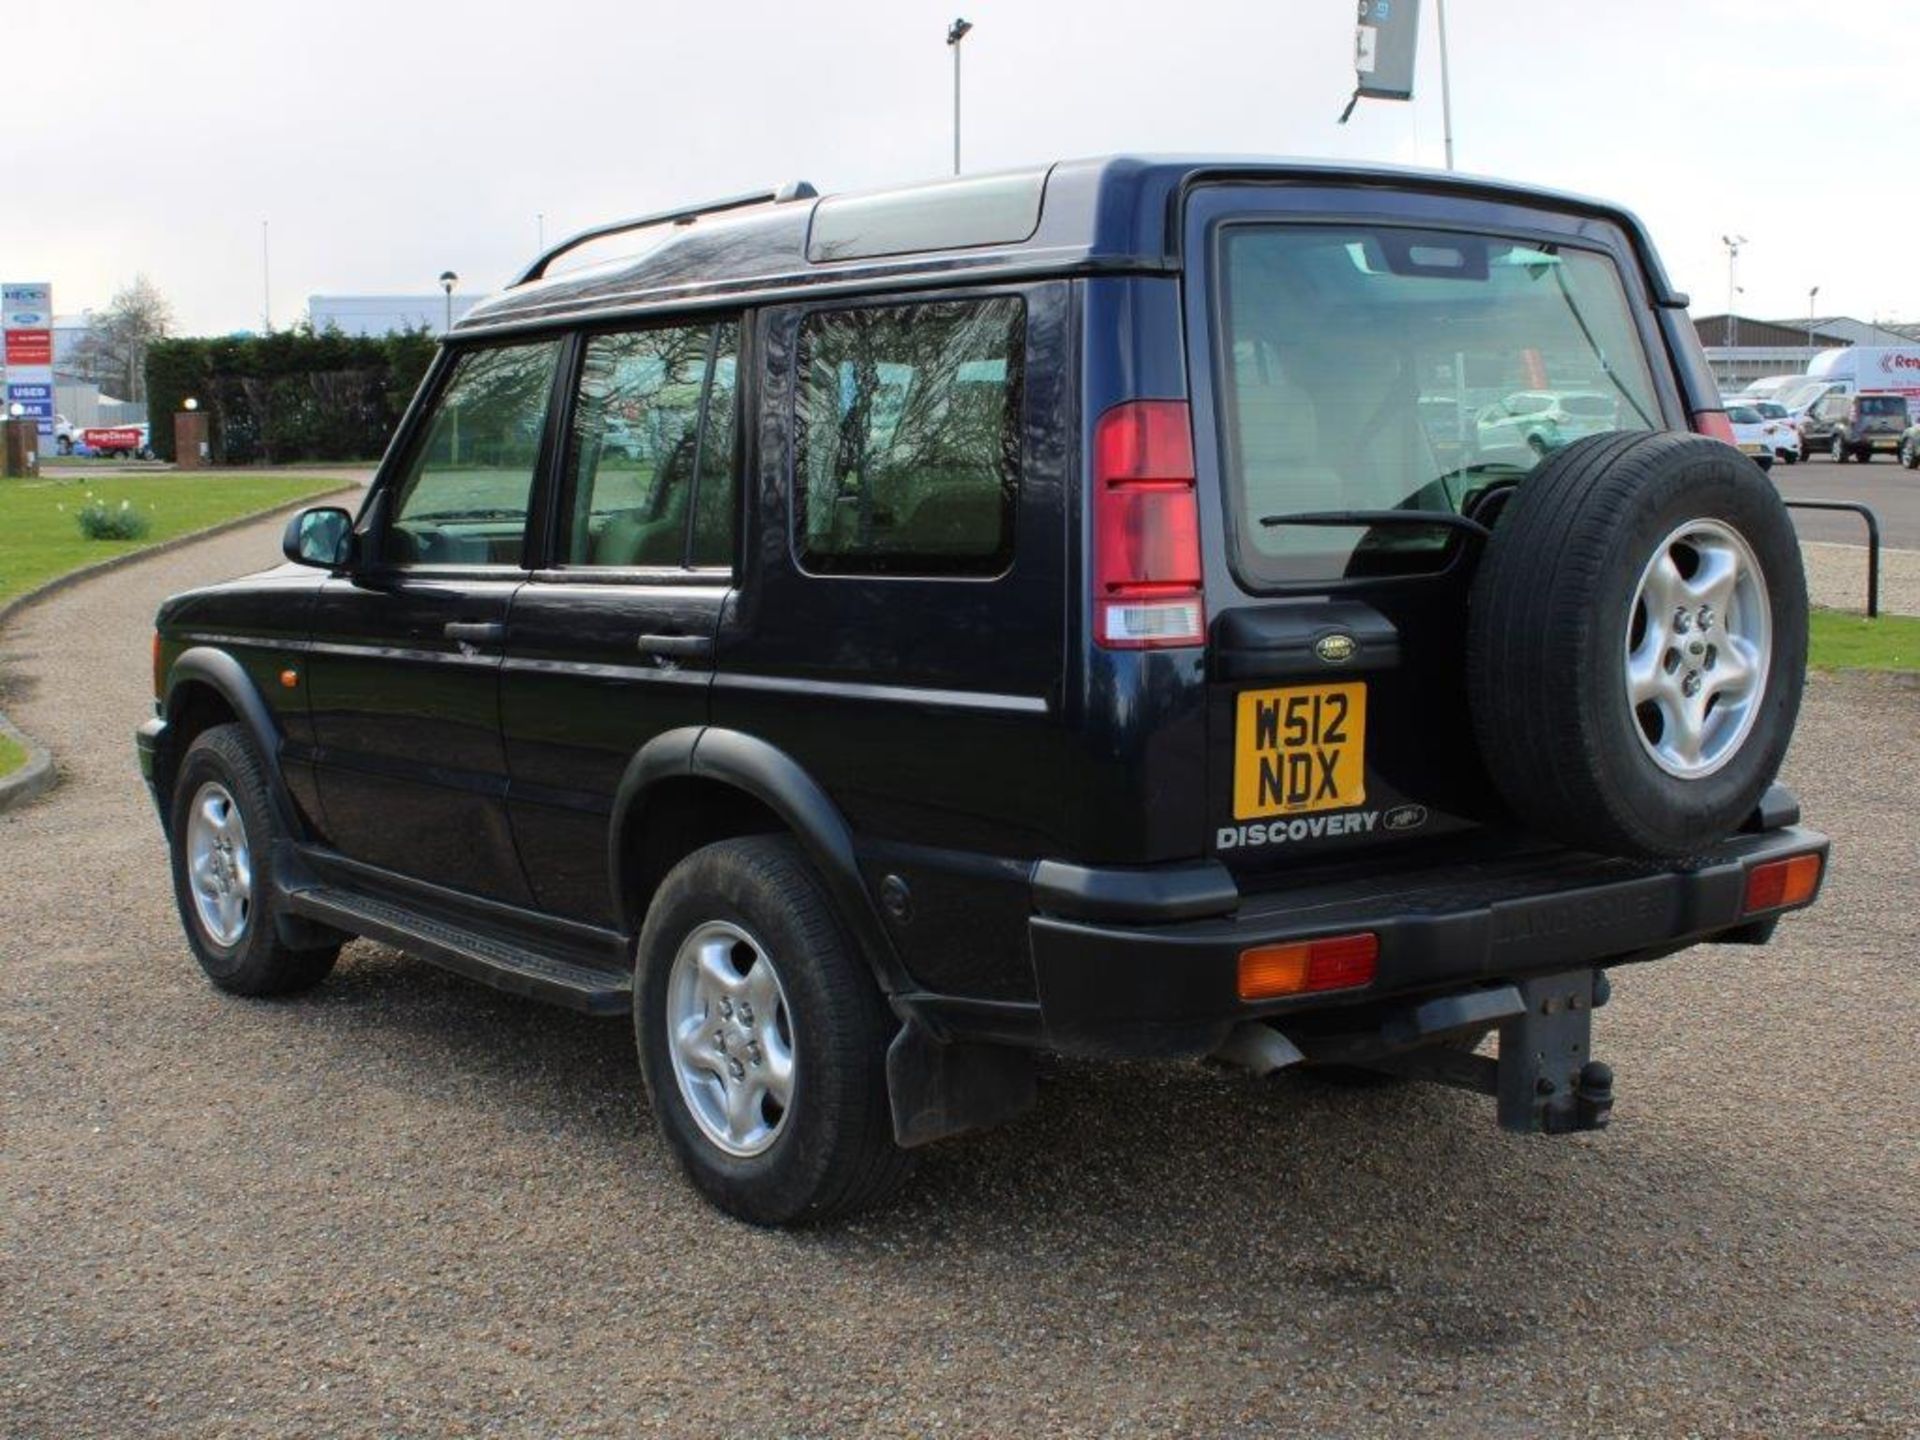 2000 Land Rover Discovery II V8 ES Auto - Image 4 of 14